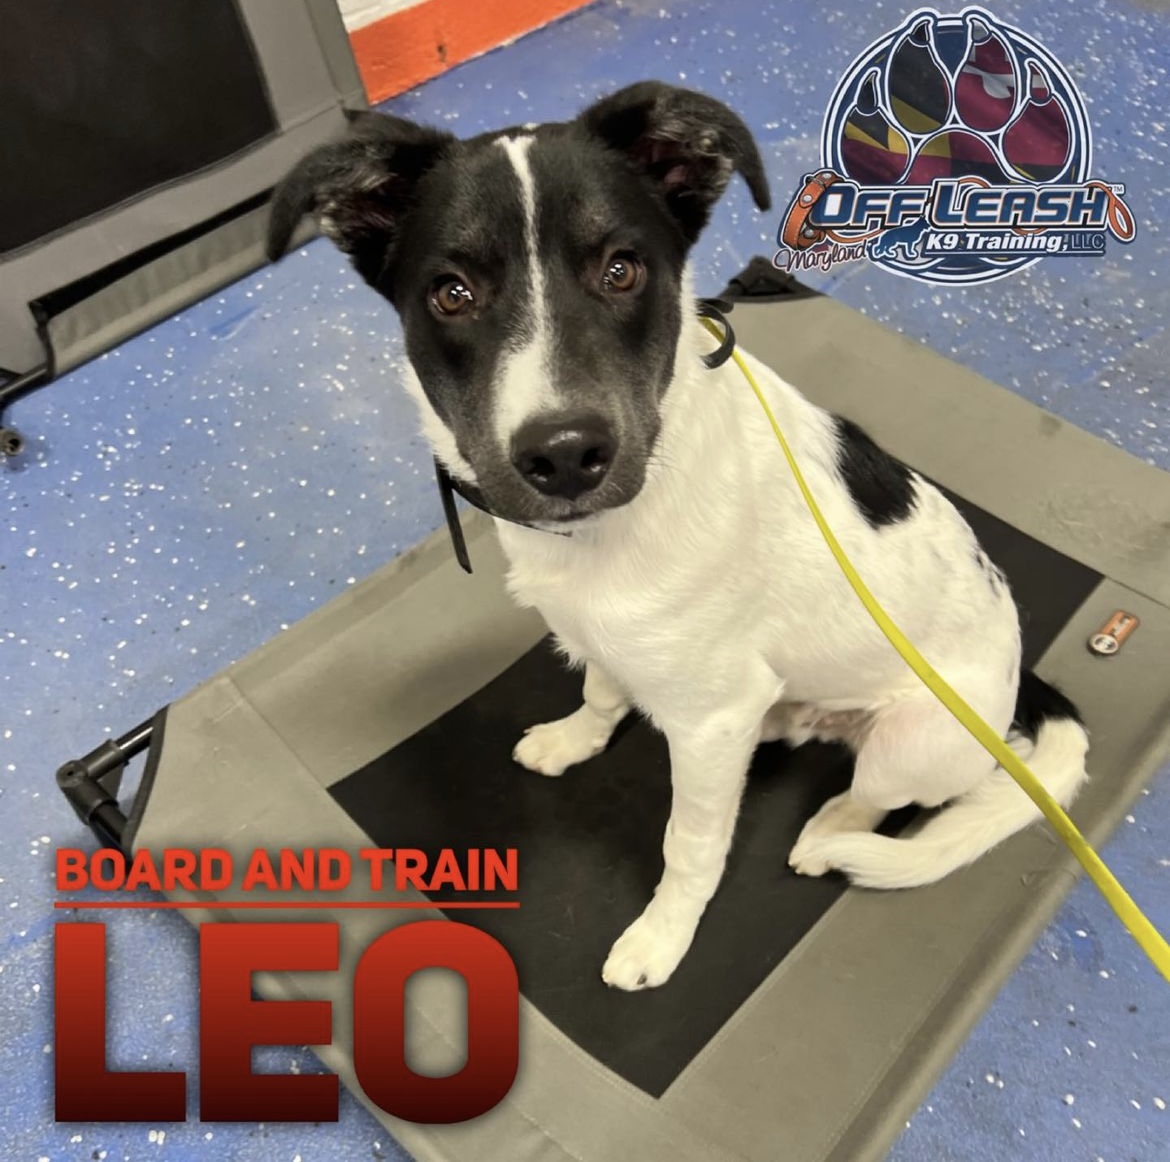 Dog named Leo who completed the board and train program